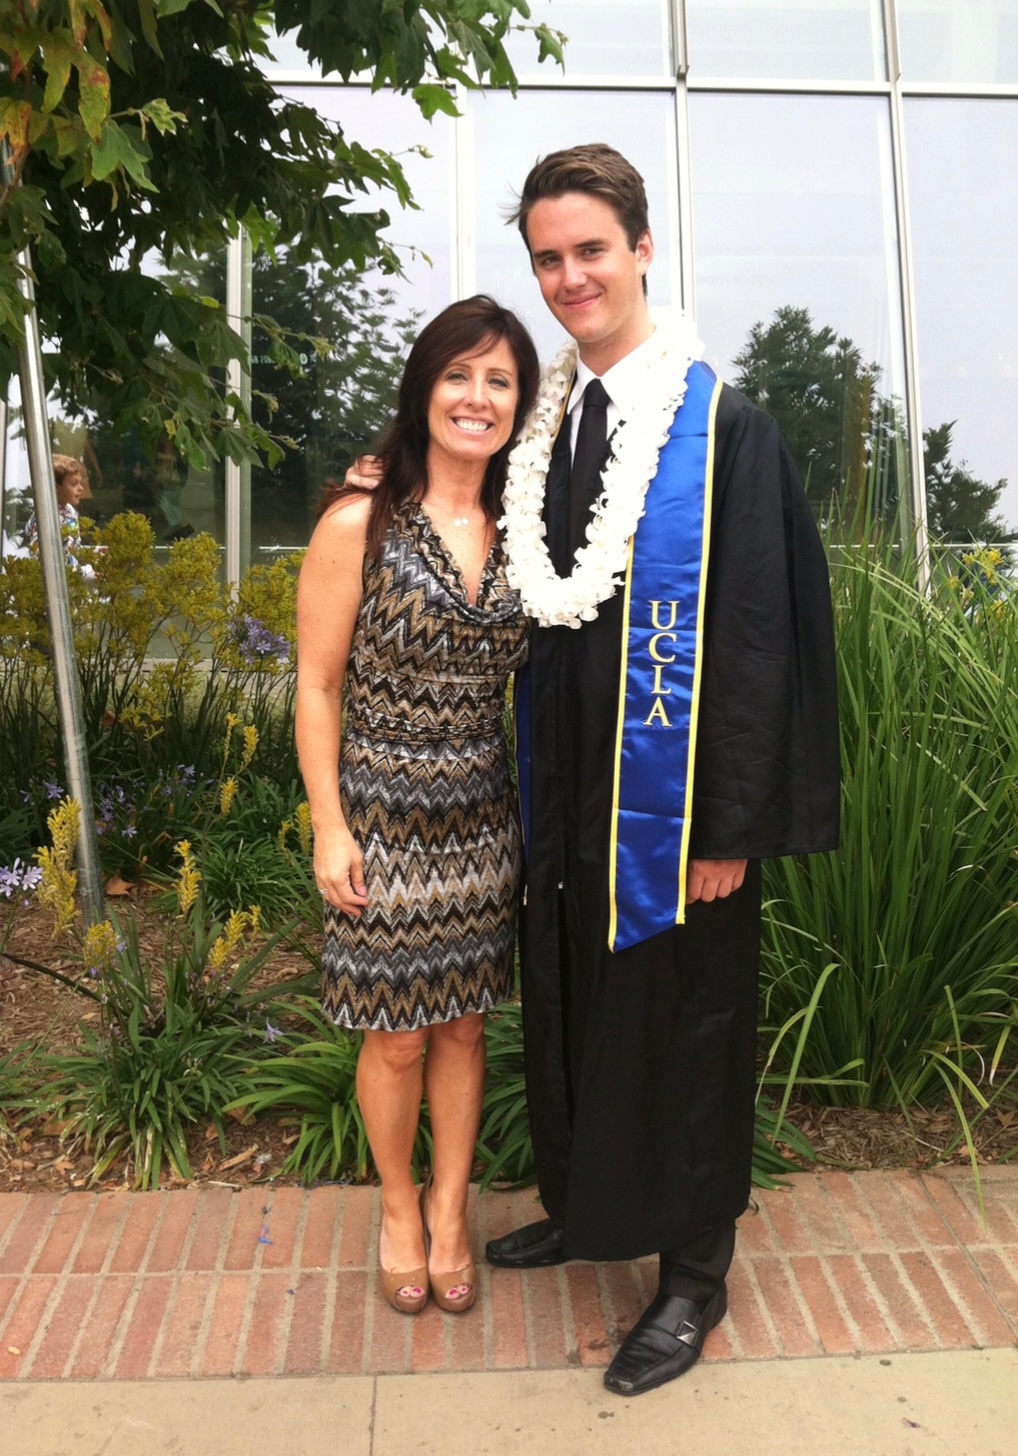 "Playing for Keeps" Author Therese Allison with her son at his UCLA Graduation, who she mentored to be a sports and business champion